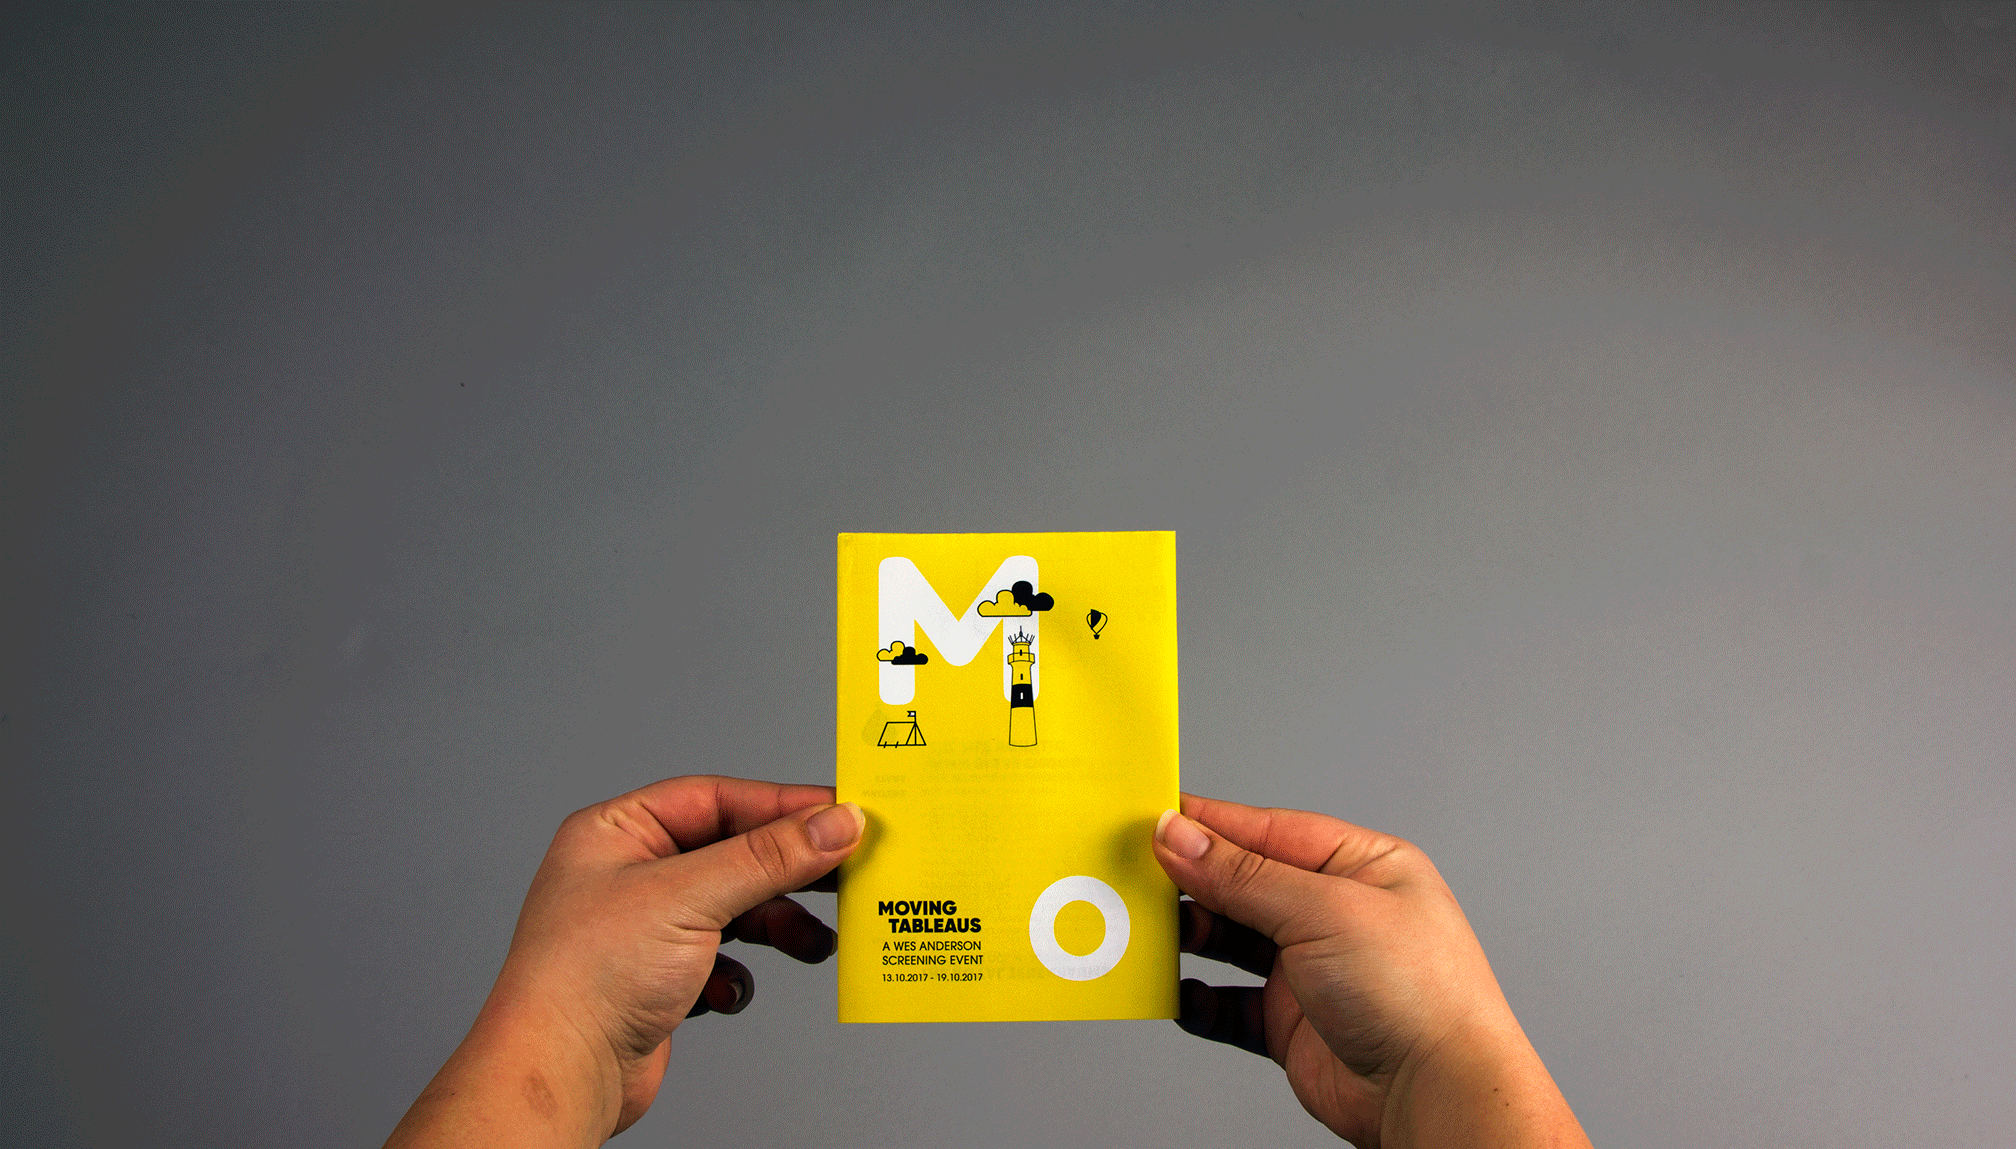 BFI-Leaflet-Opening-GIF_scaled-down-for-web.gif